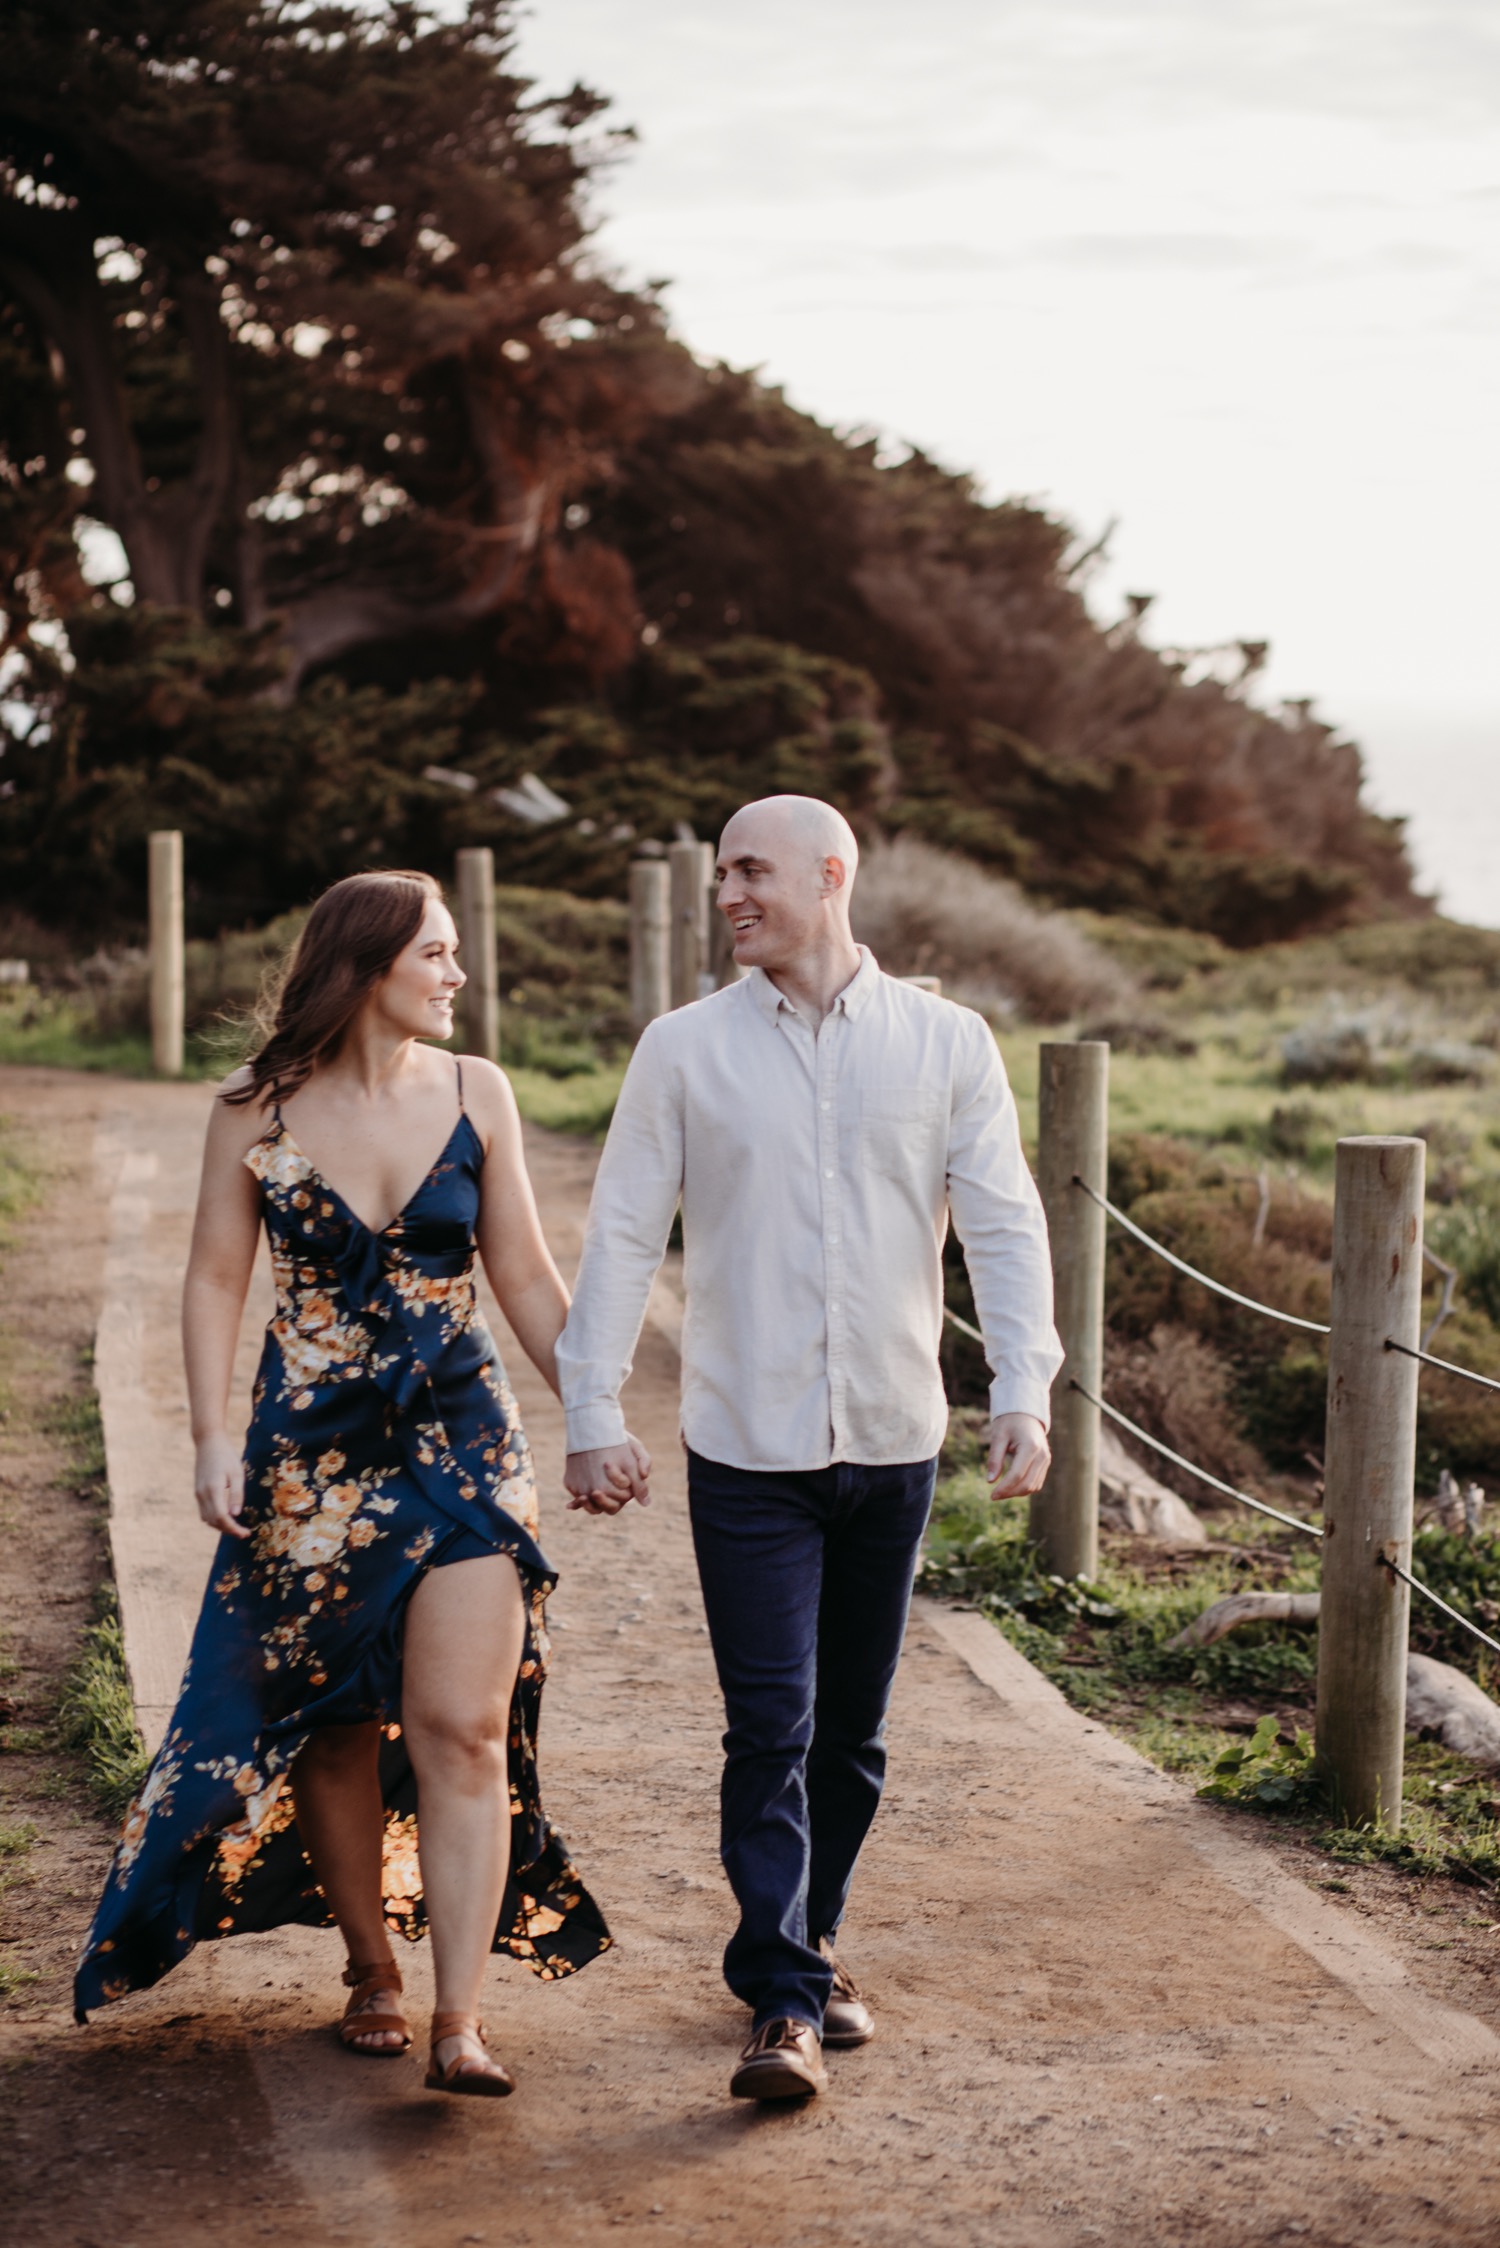 Couple walks holding hands down a dirt path on their Sutro Baths engagement photoshoot.